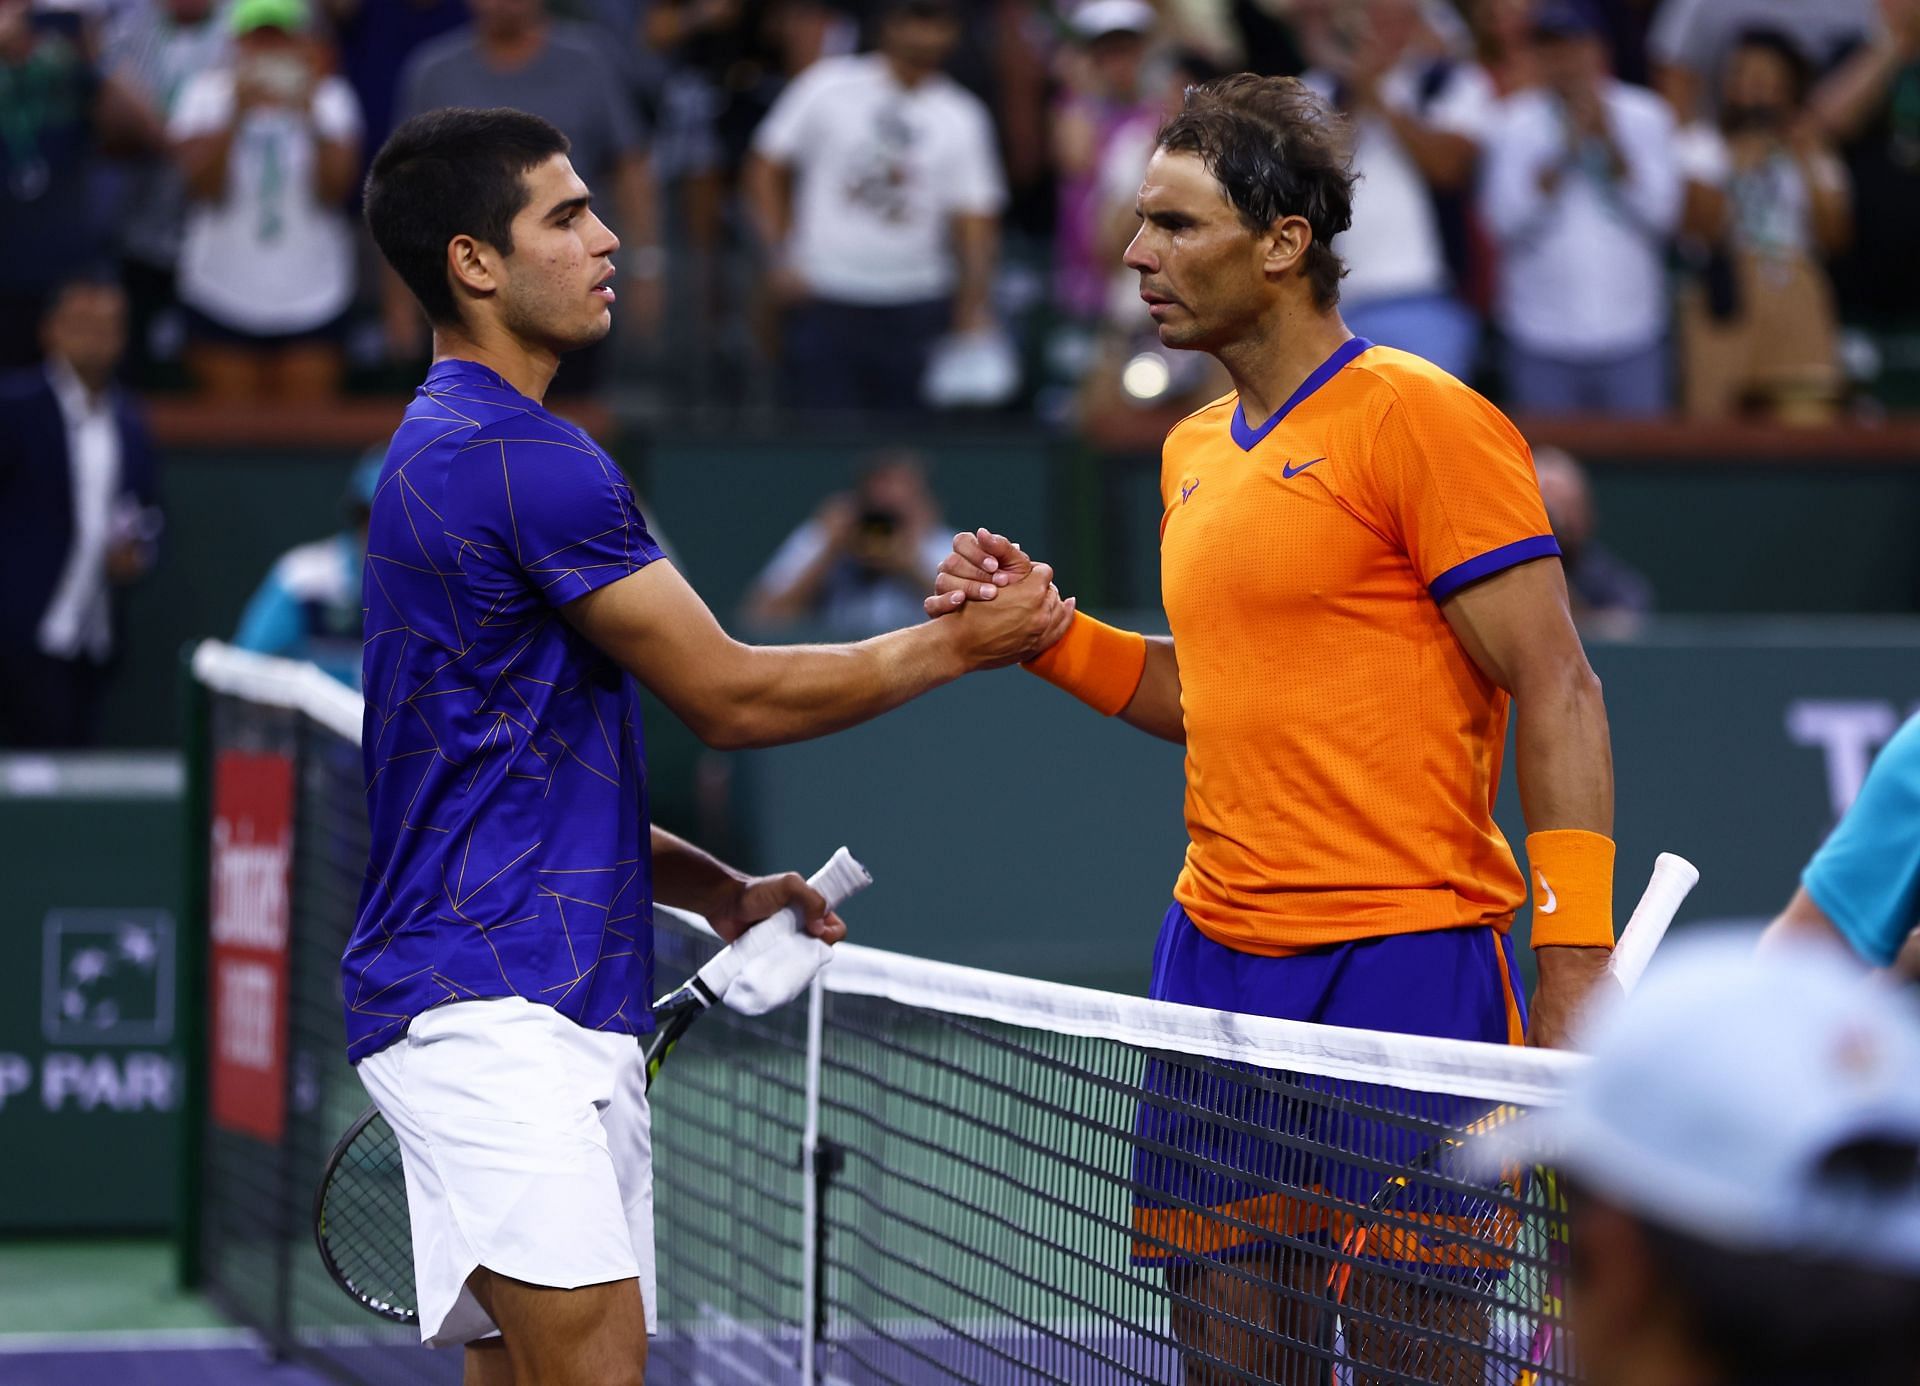 Carlos Alcaraz hopes to take on Rafael Nadal and the best players in the world a lot this year